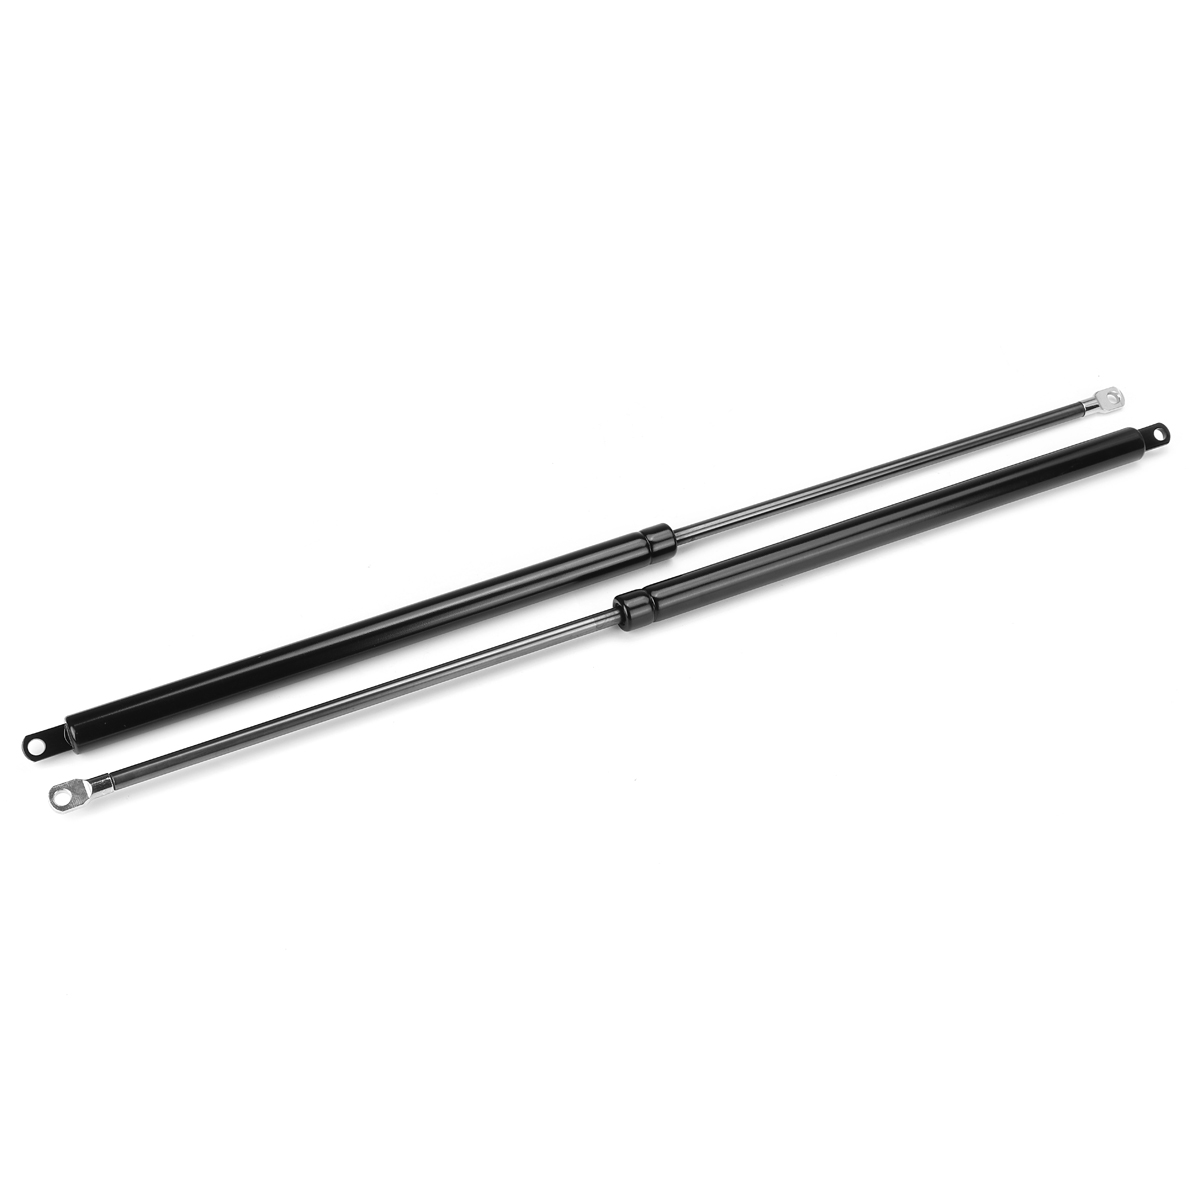 2Pcs-310-810mm-Extended-100-350-Compressed-Universal-800N-Force-Gas-Springs-Struts-Lifters-Supports--1777718-10